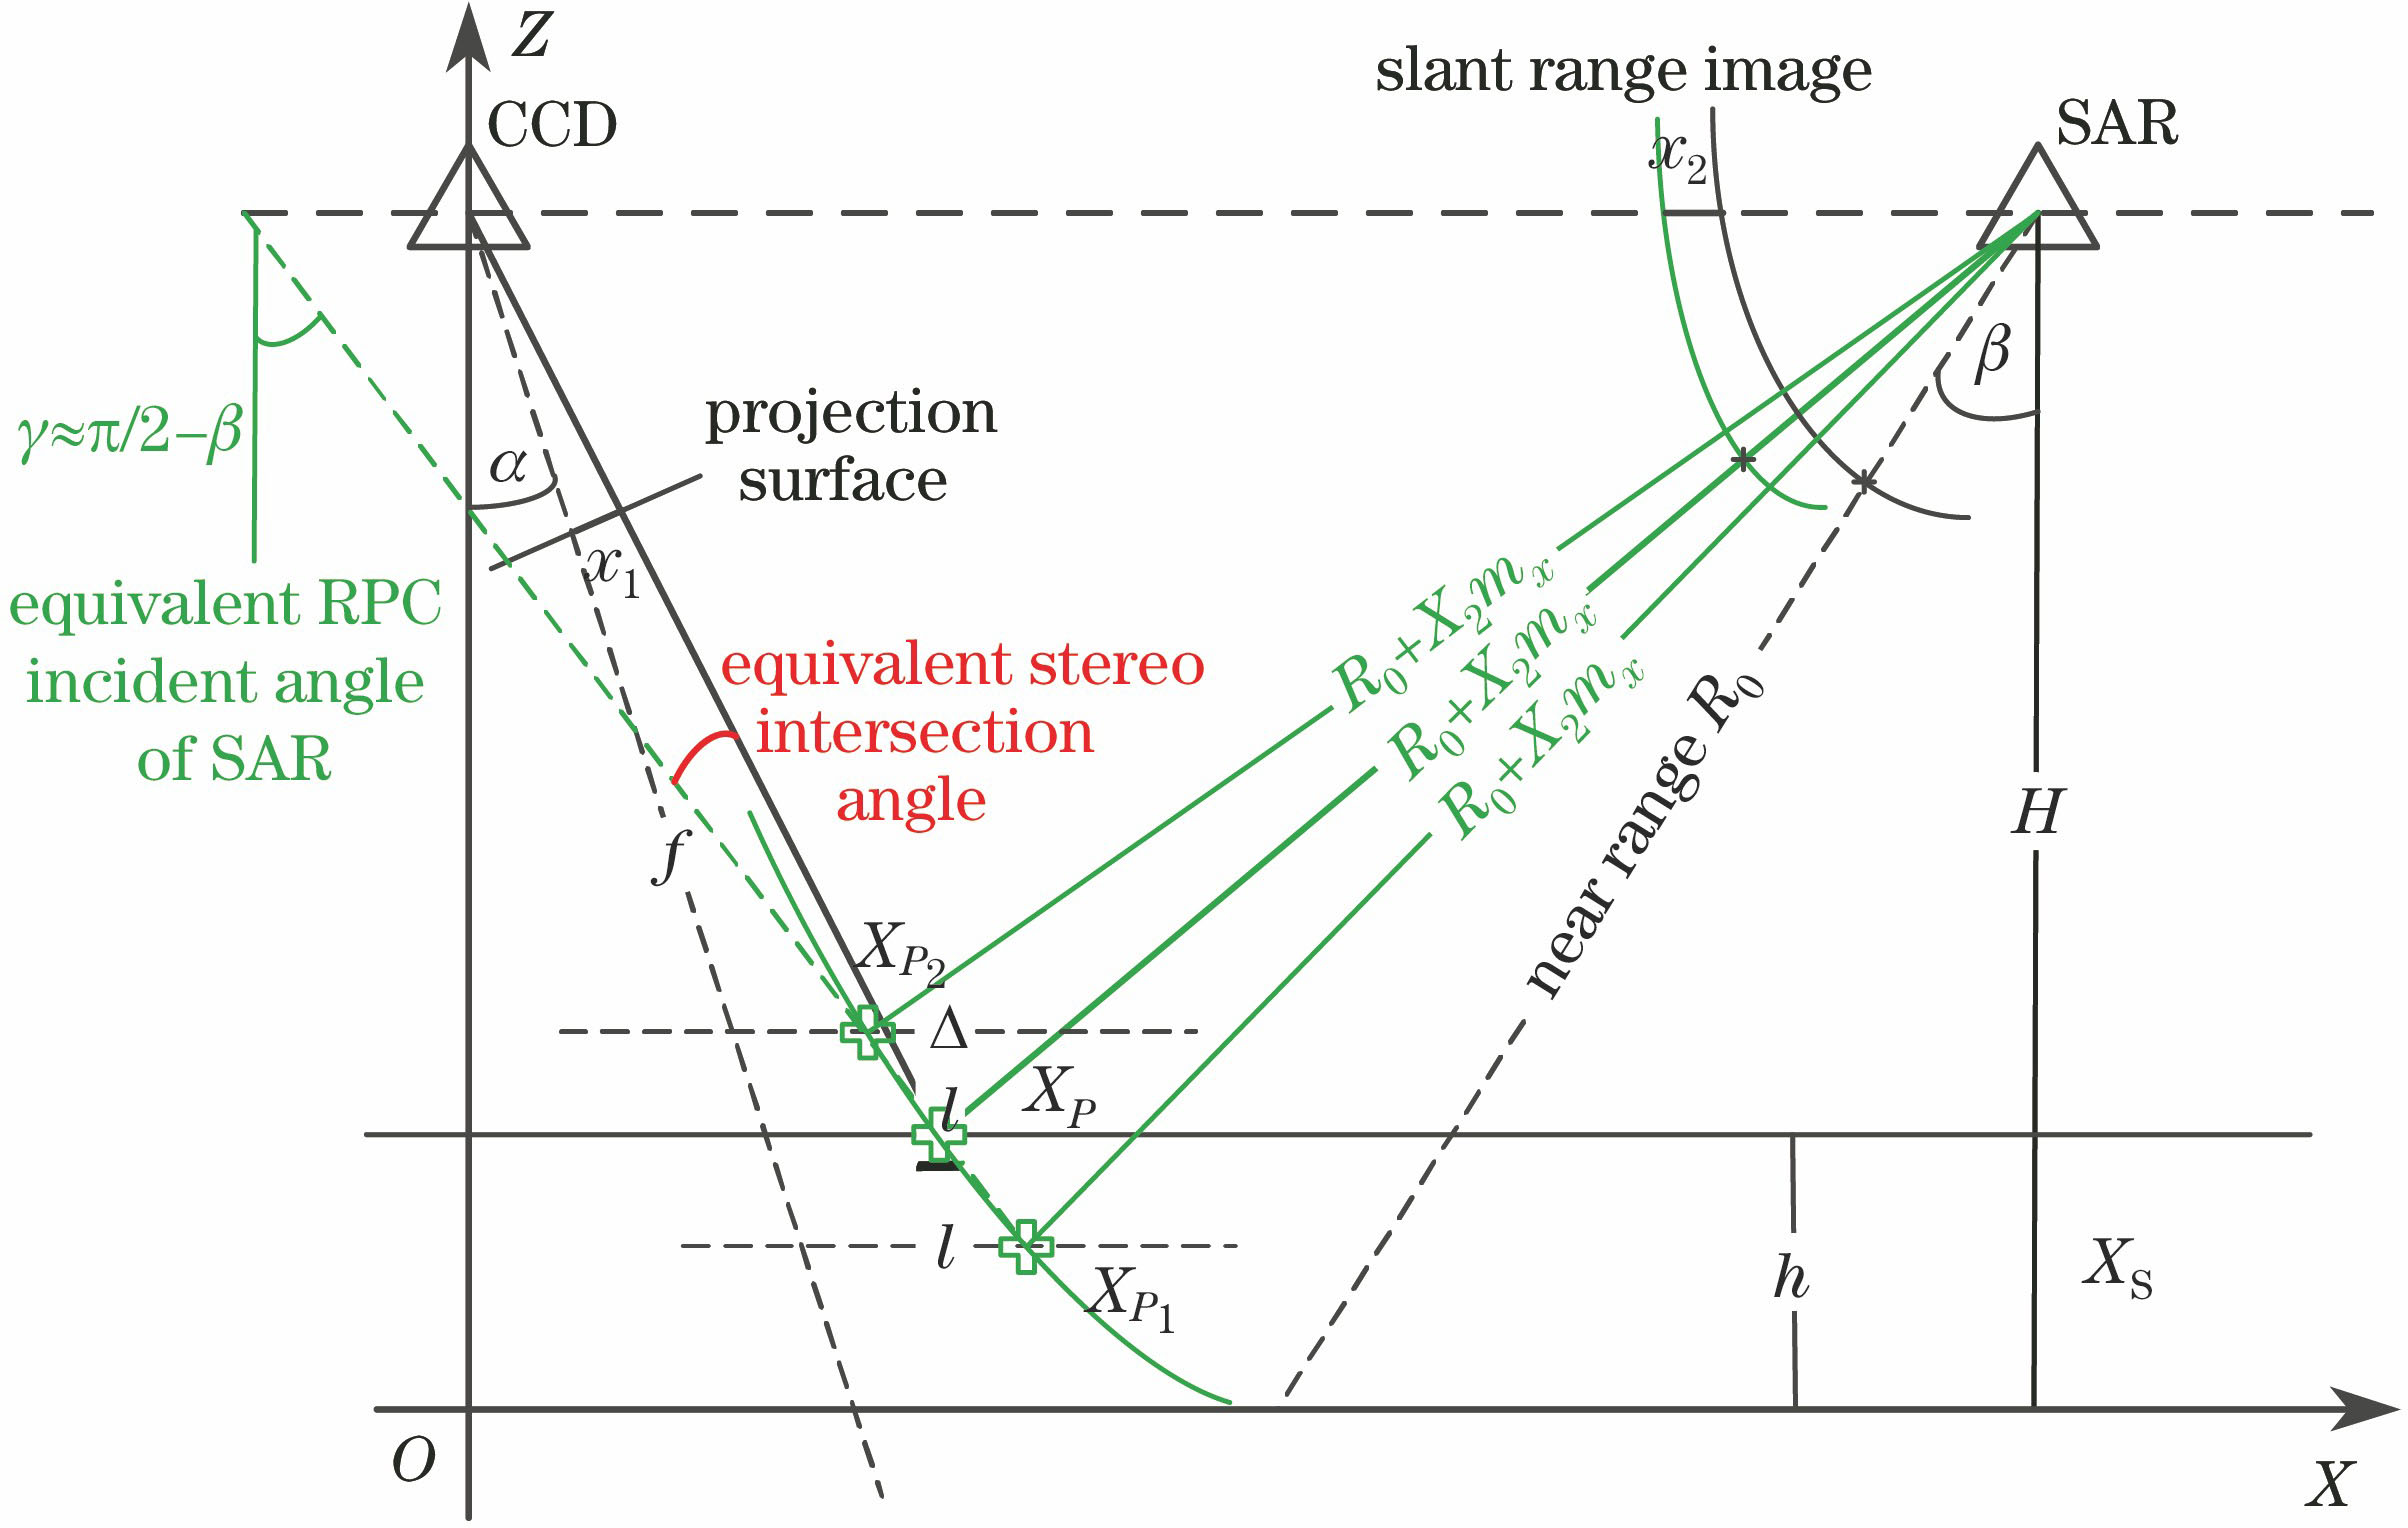 RPC solution of SAR and its equivalent stereo intersection with CCD